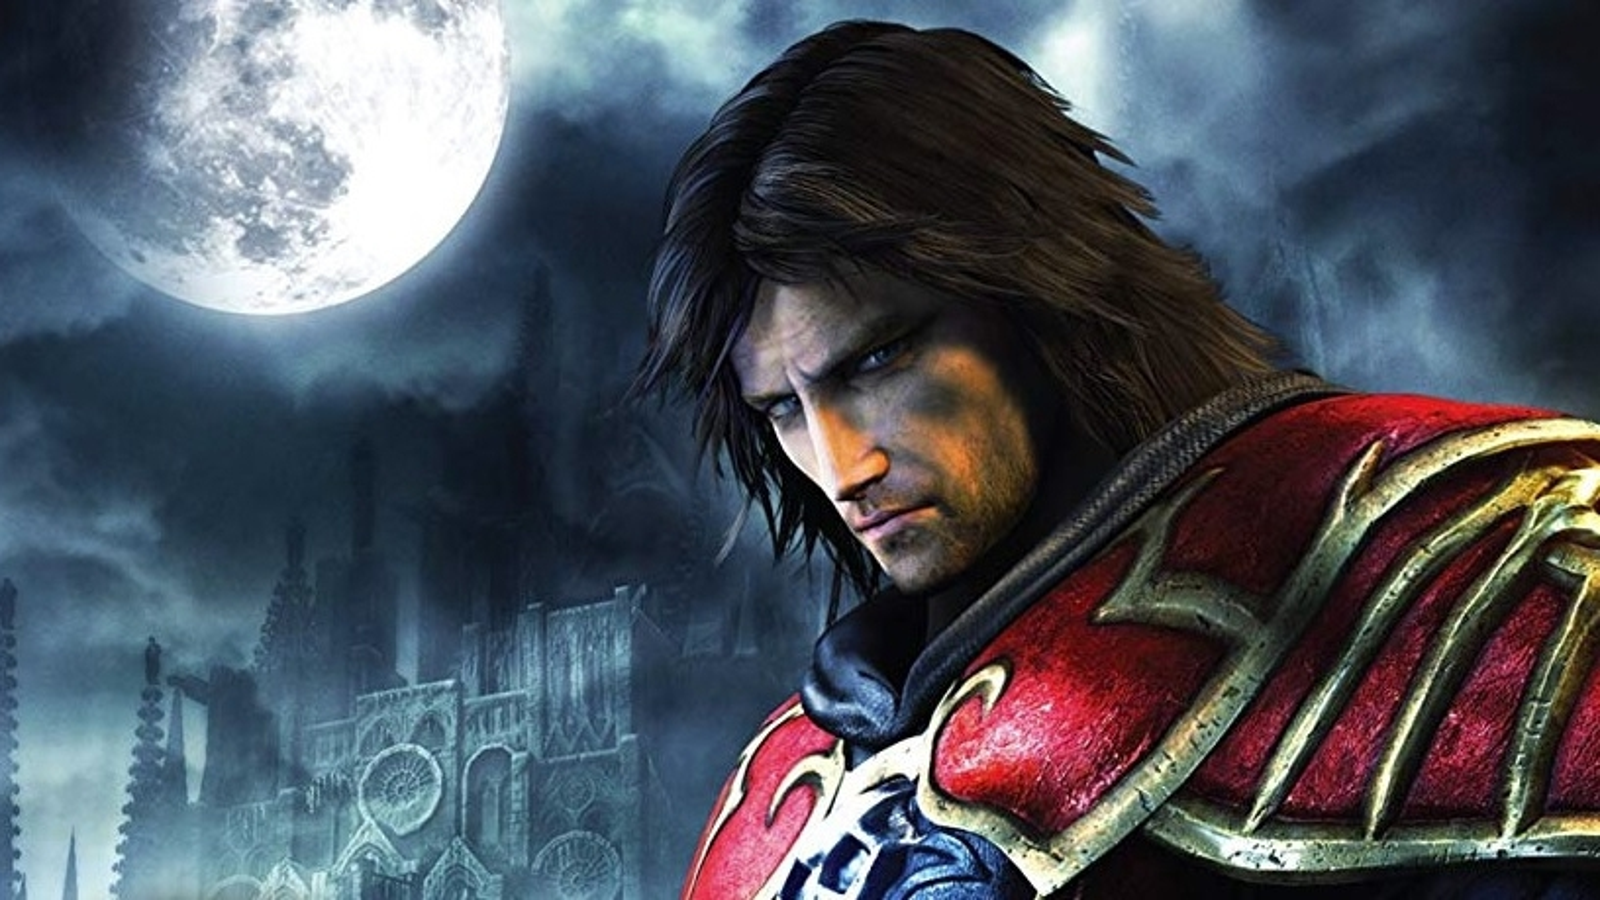 Castlevania: Lords of Shadow' Series Now Backward Compatible On